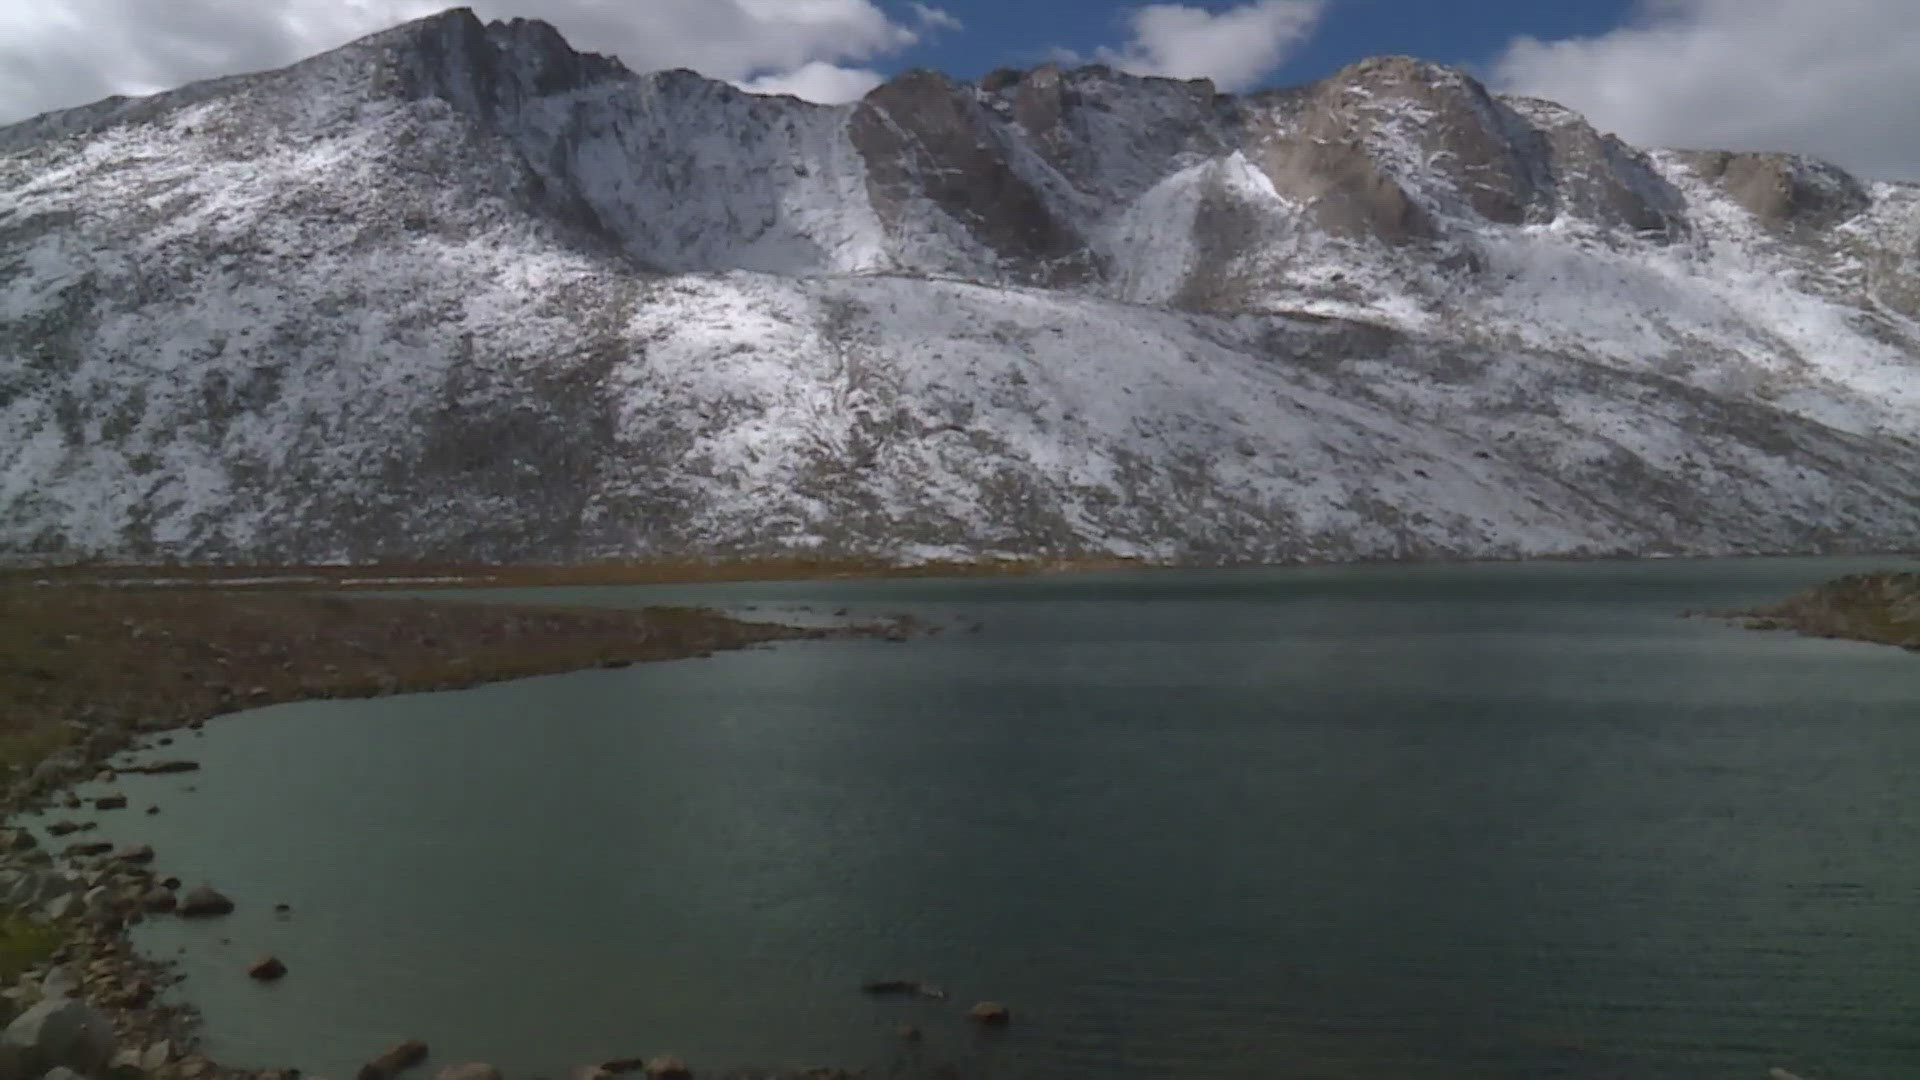 Reservations for Mount Blue Sky, formerly known as Mount Evans, will open May 31.